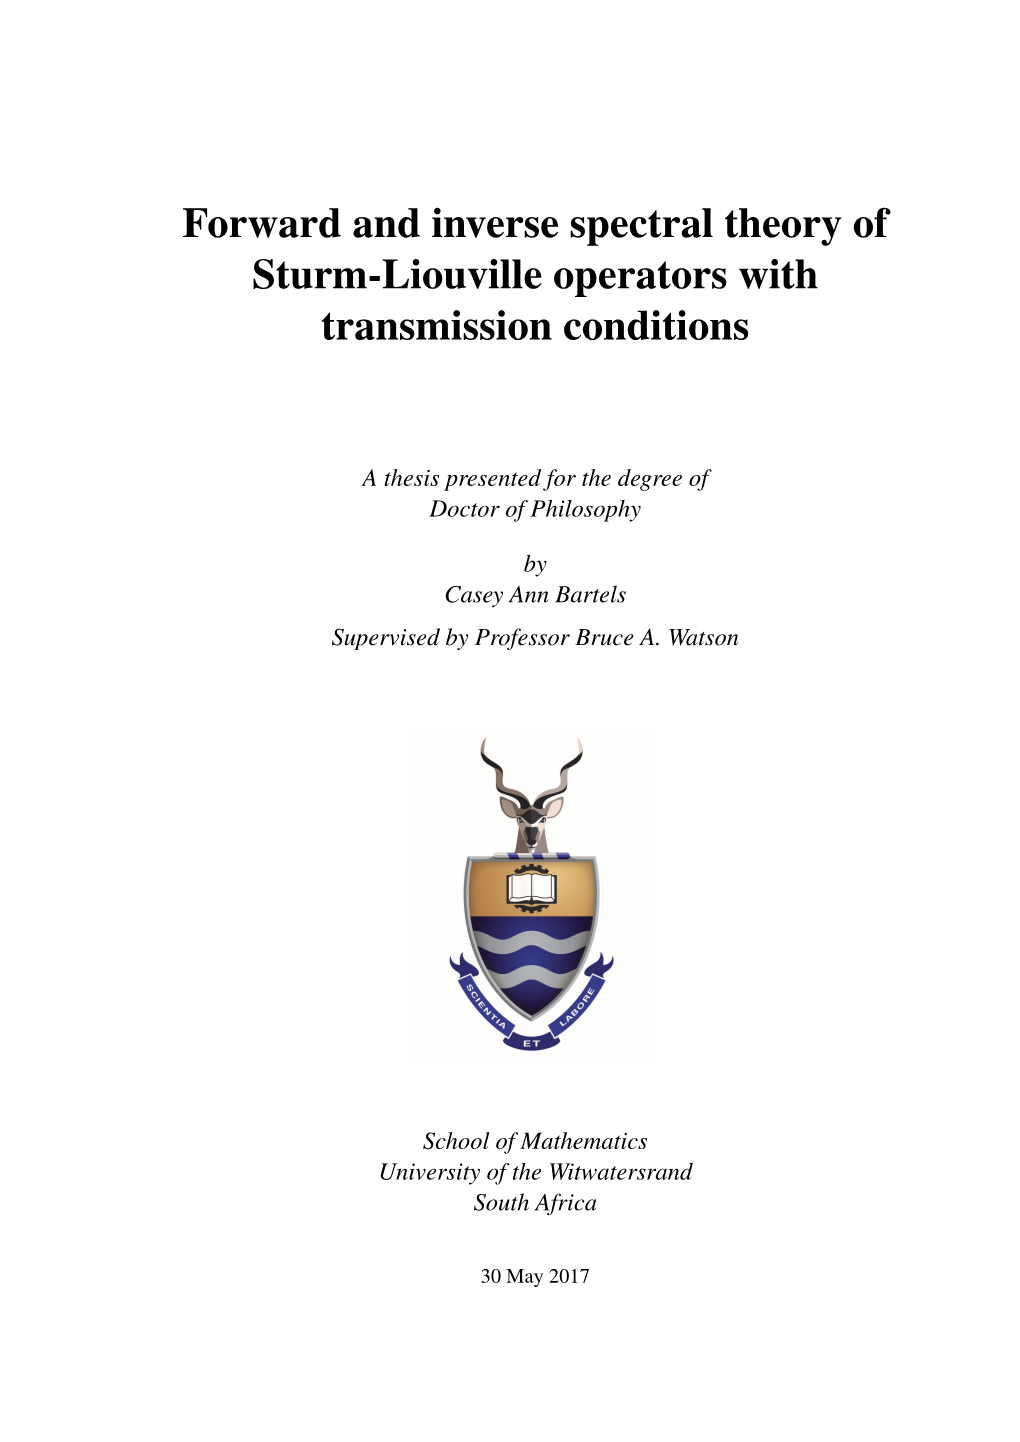 Forward and Inverse Spectral Theory of Sturm-Liouville Operators with Transmission Conditions